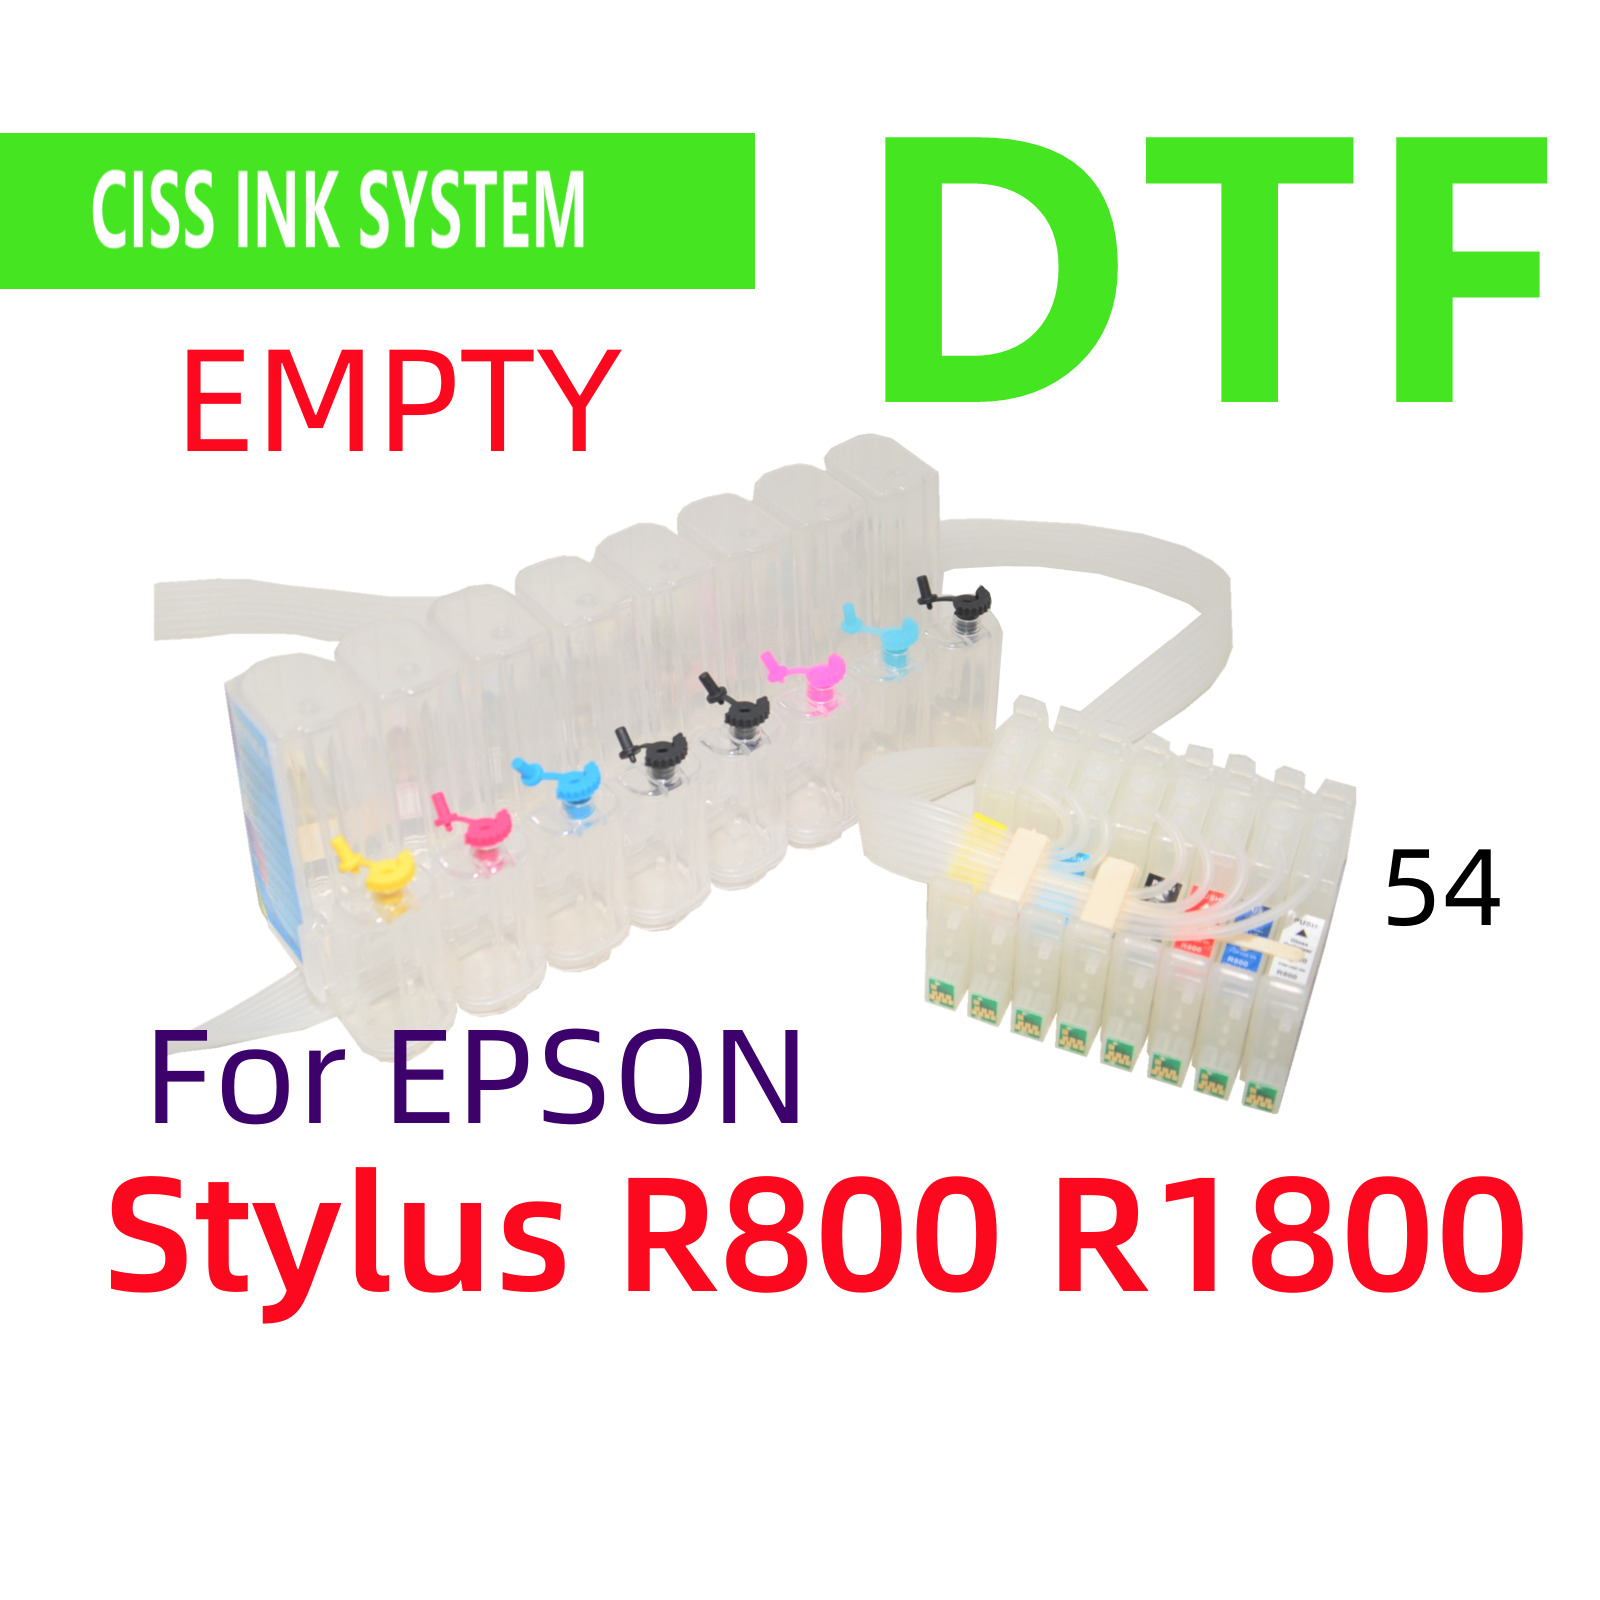 Refillable Empty Cis ciss ink system for Stylus R800 R1800 printer DTF printing